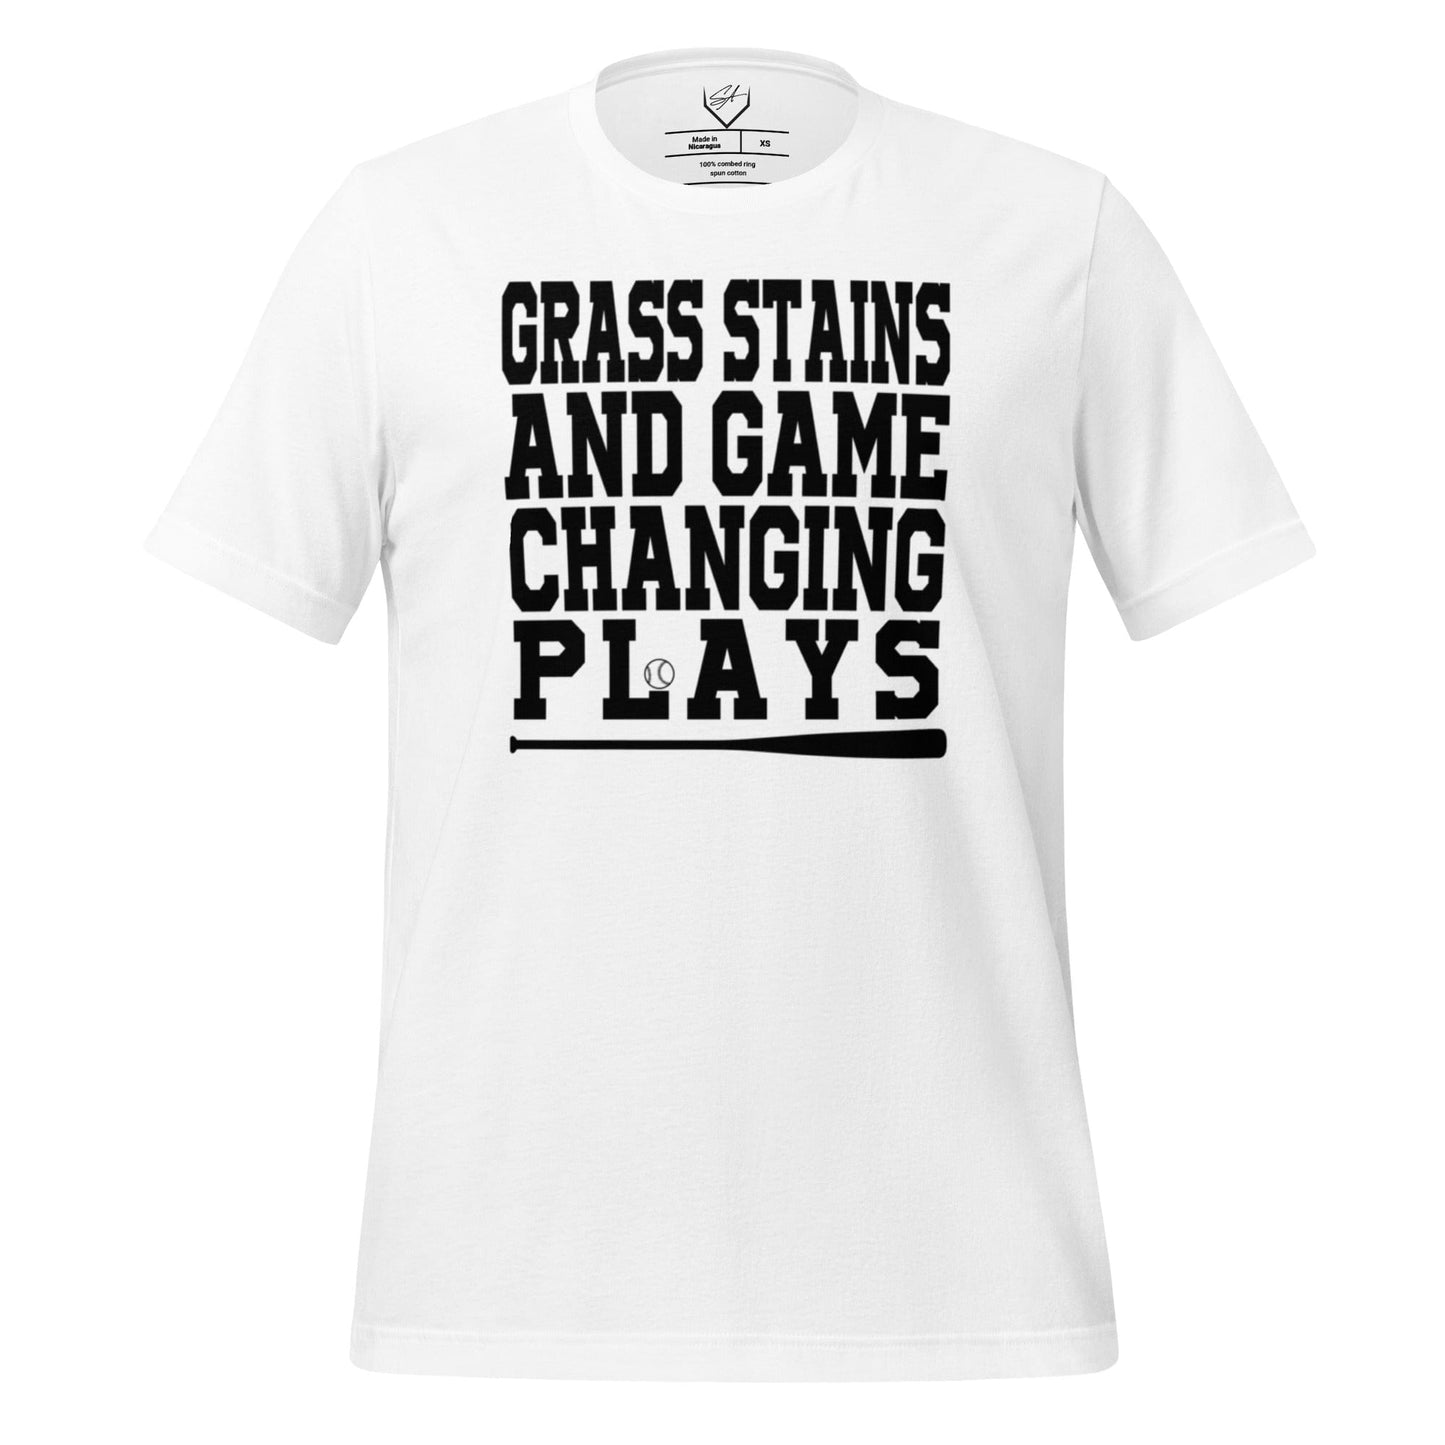 Grass Stains And Game Changing Plays - Adult Tee